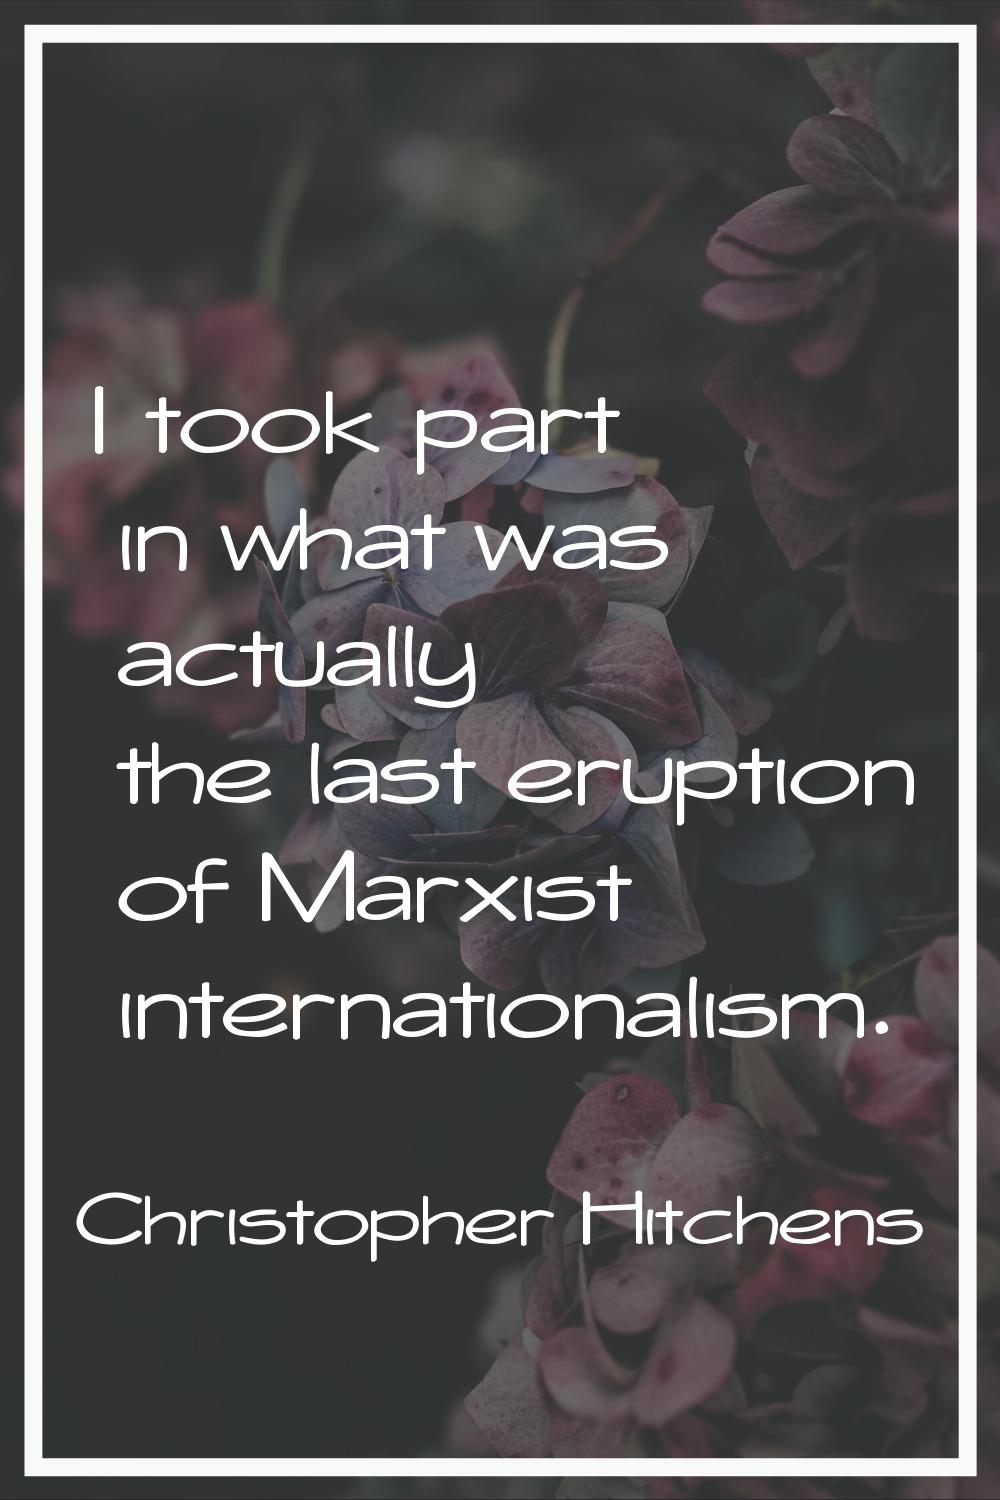 I took part in what was actually the last eruption of Marxist internationalism.